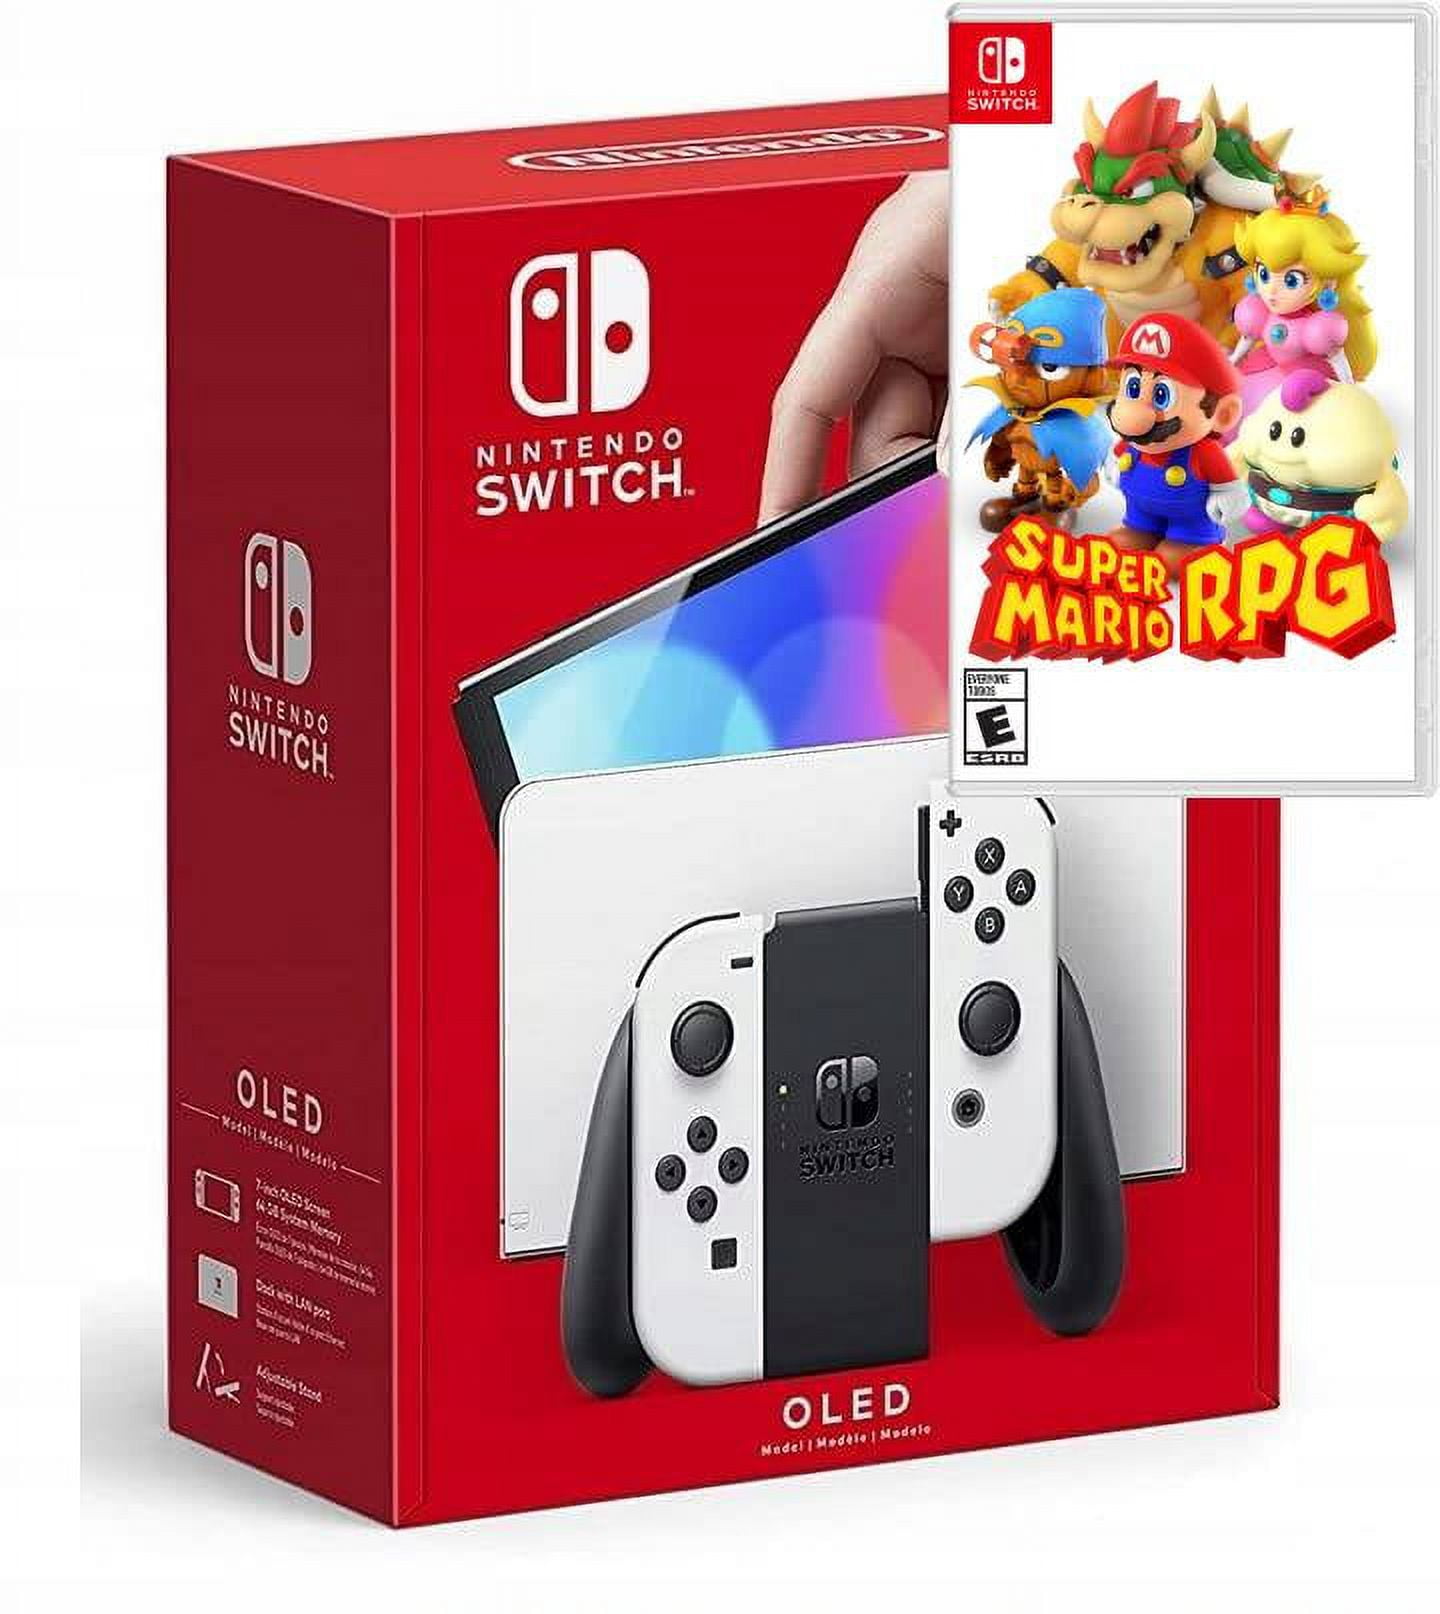 Nintendo Switch OLED Model w/ Red Edition with Super Mario RPG Game -  Limited Bundle - Import with US Plug NEW